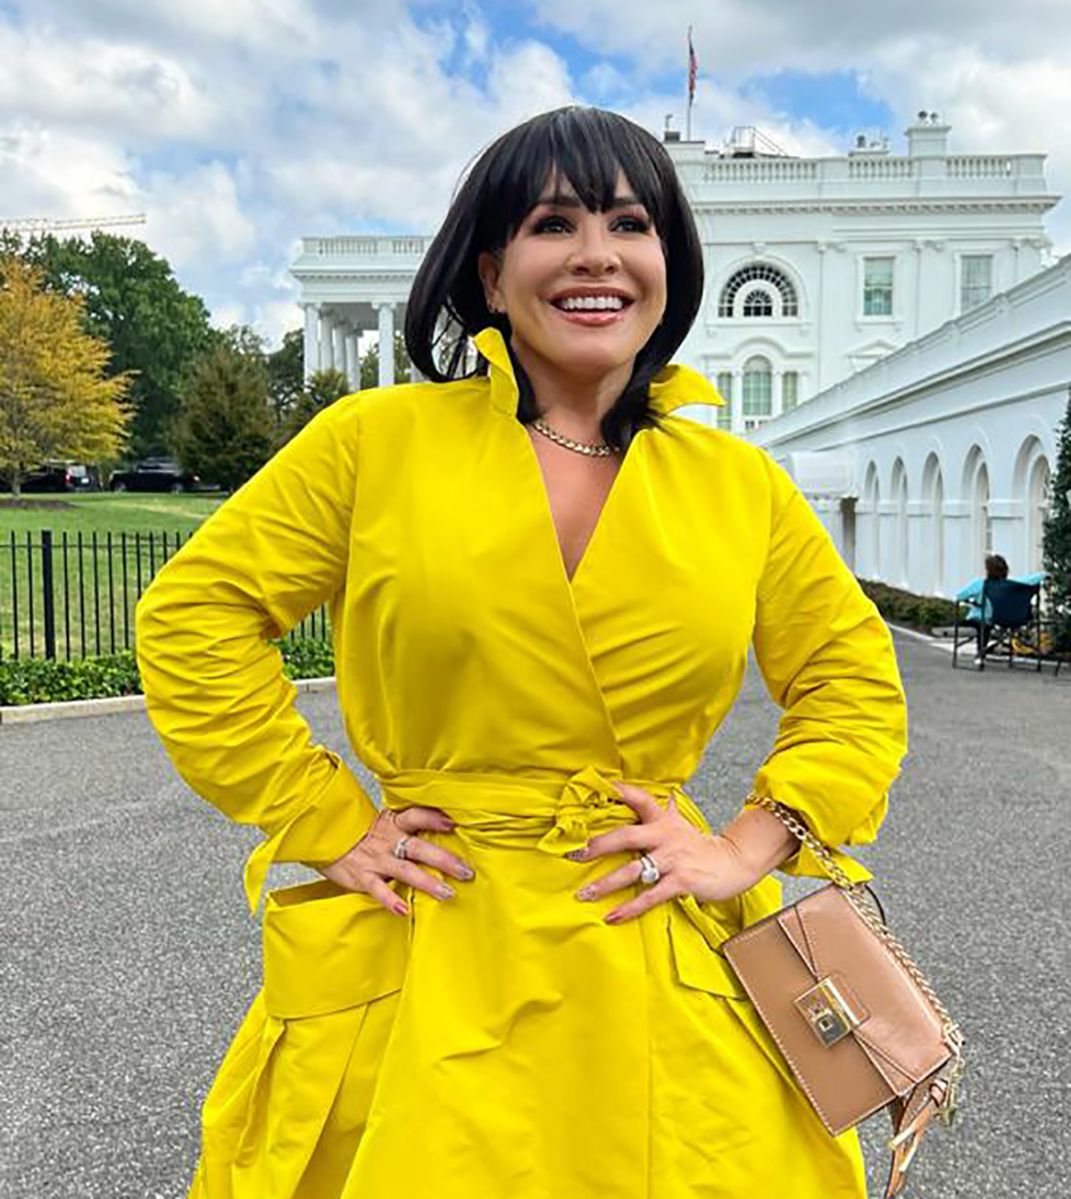 Carolina Sandoval makes her famous White House lunch